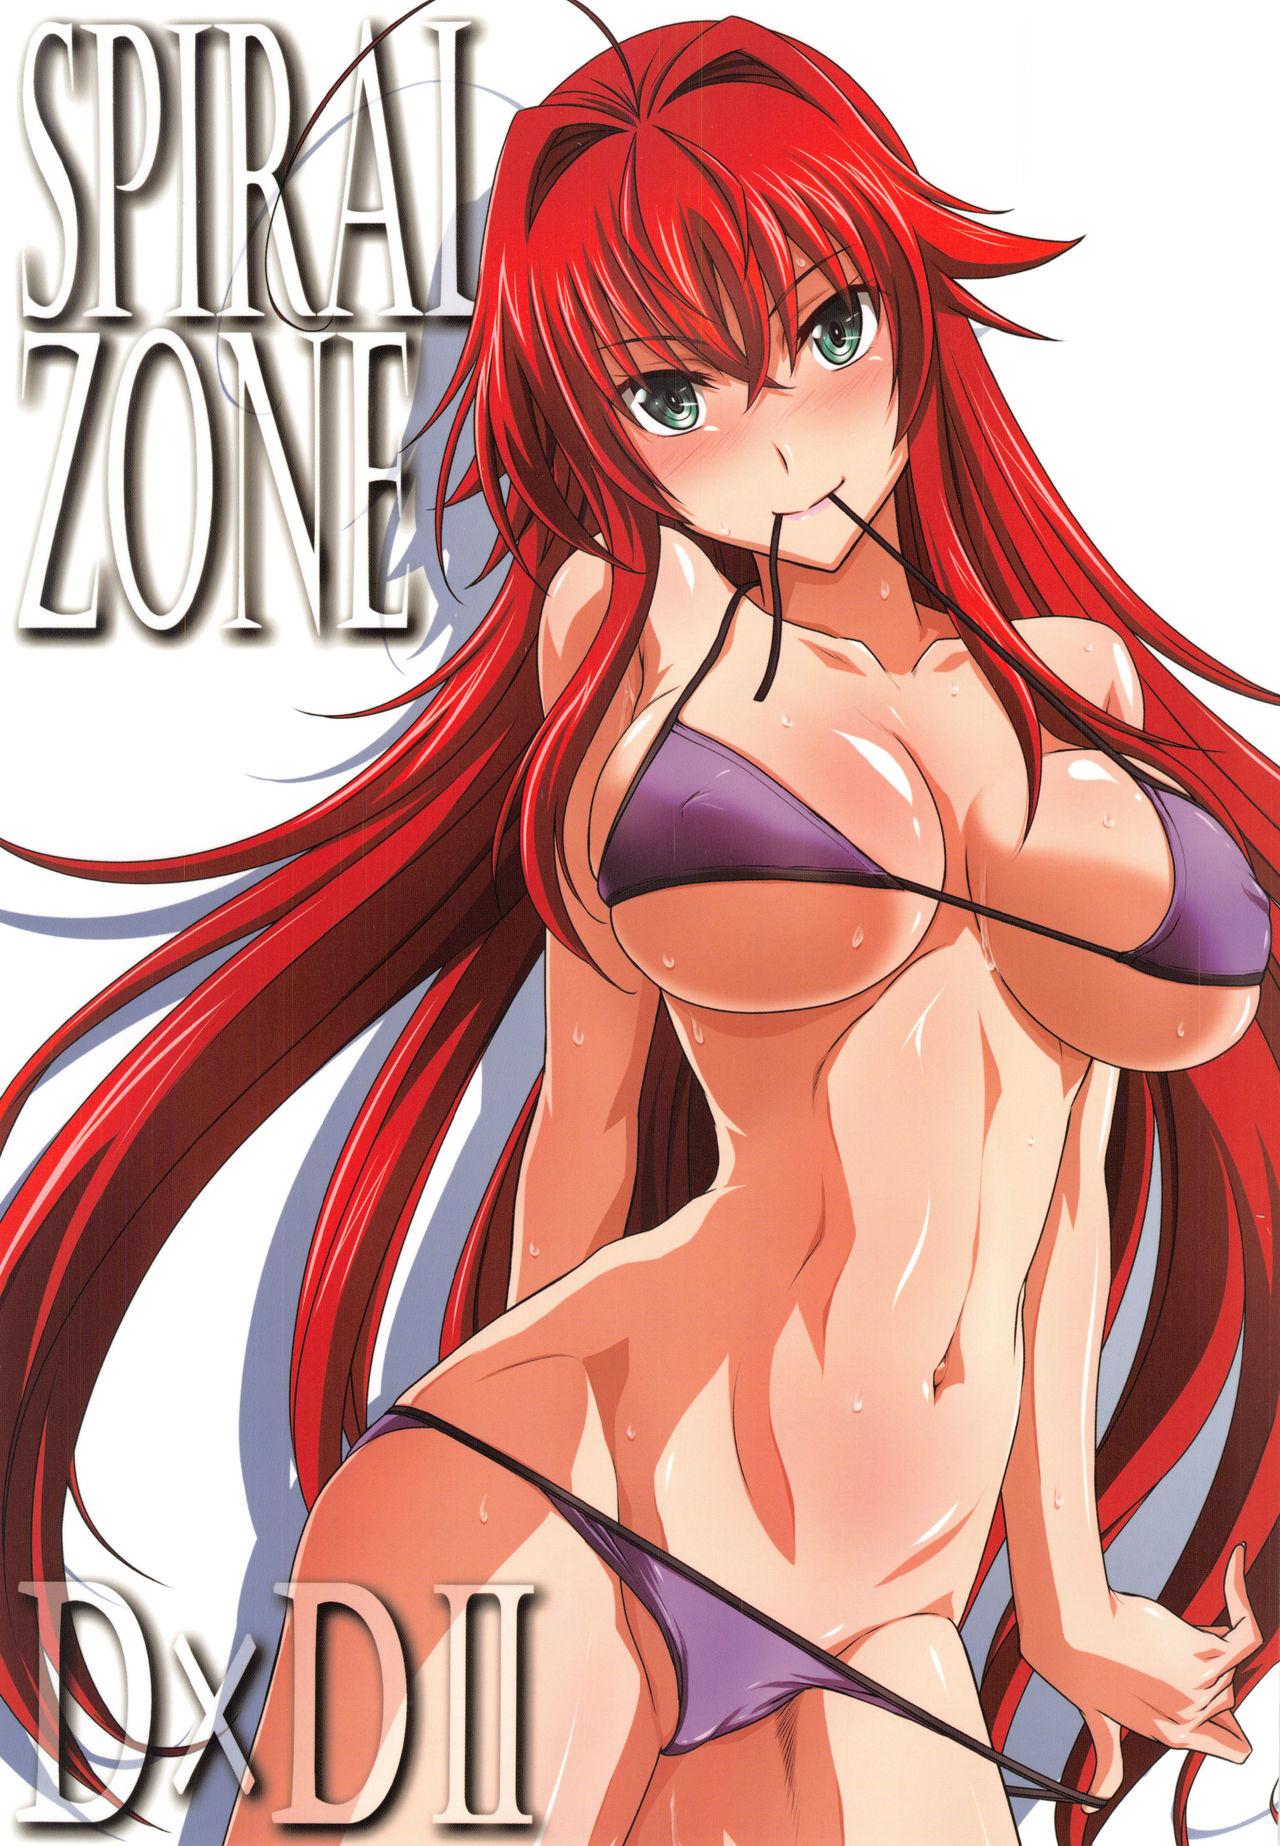 Eurosex SPIRAL ZONE DxD II - Highschool dxd Shaved Pussy - Page 1